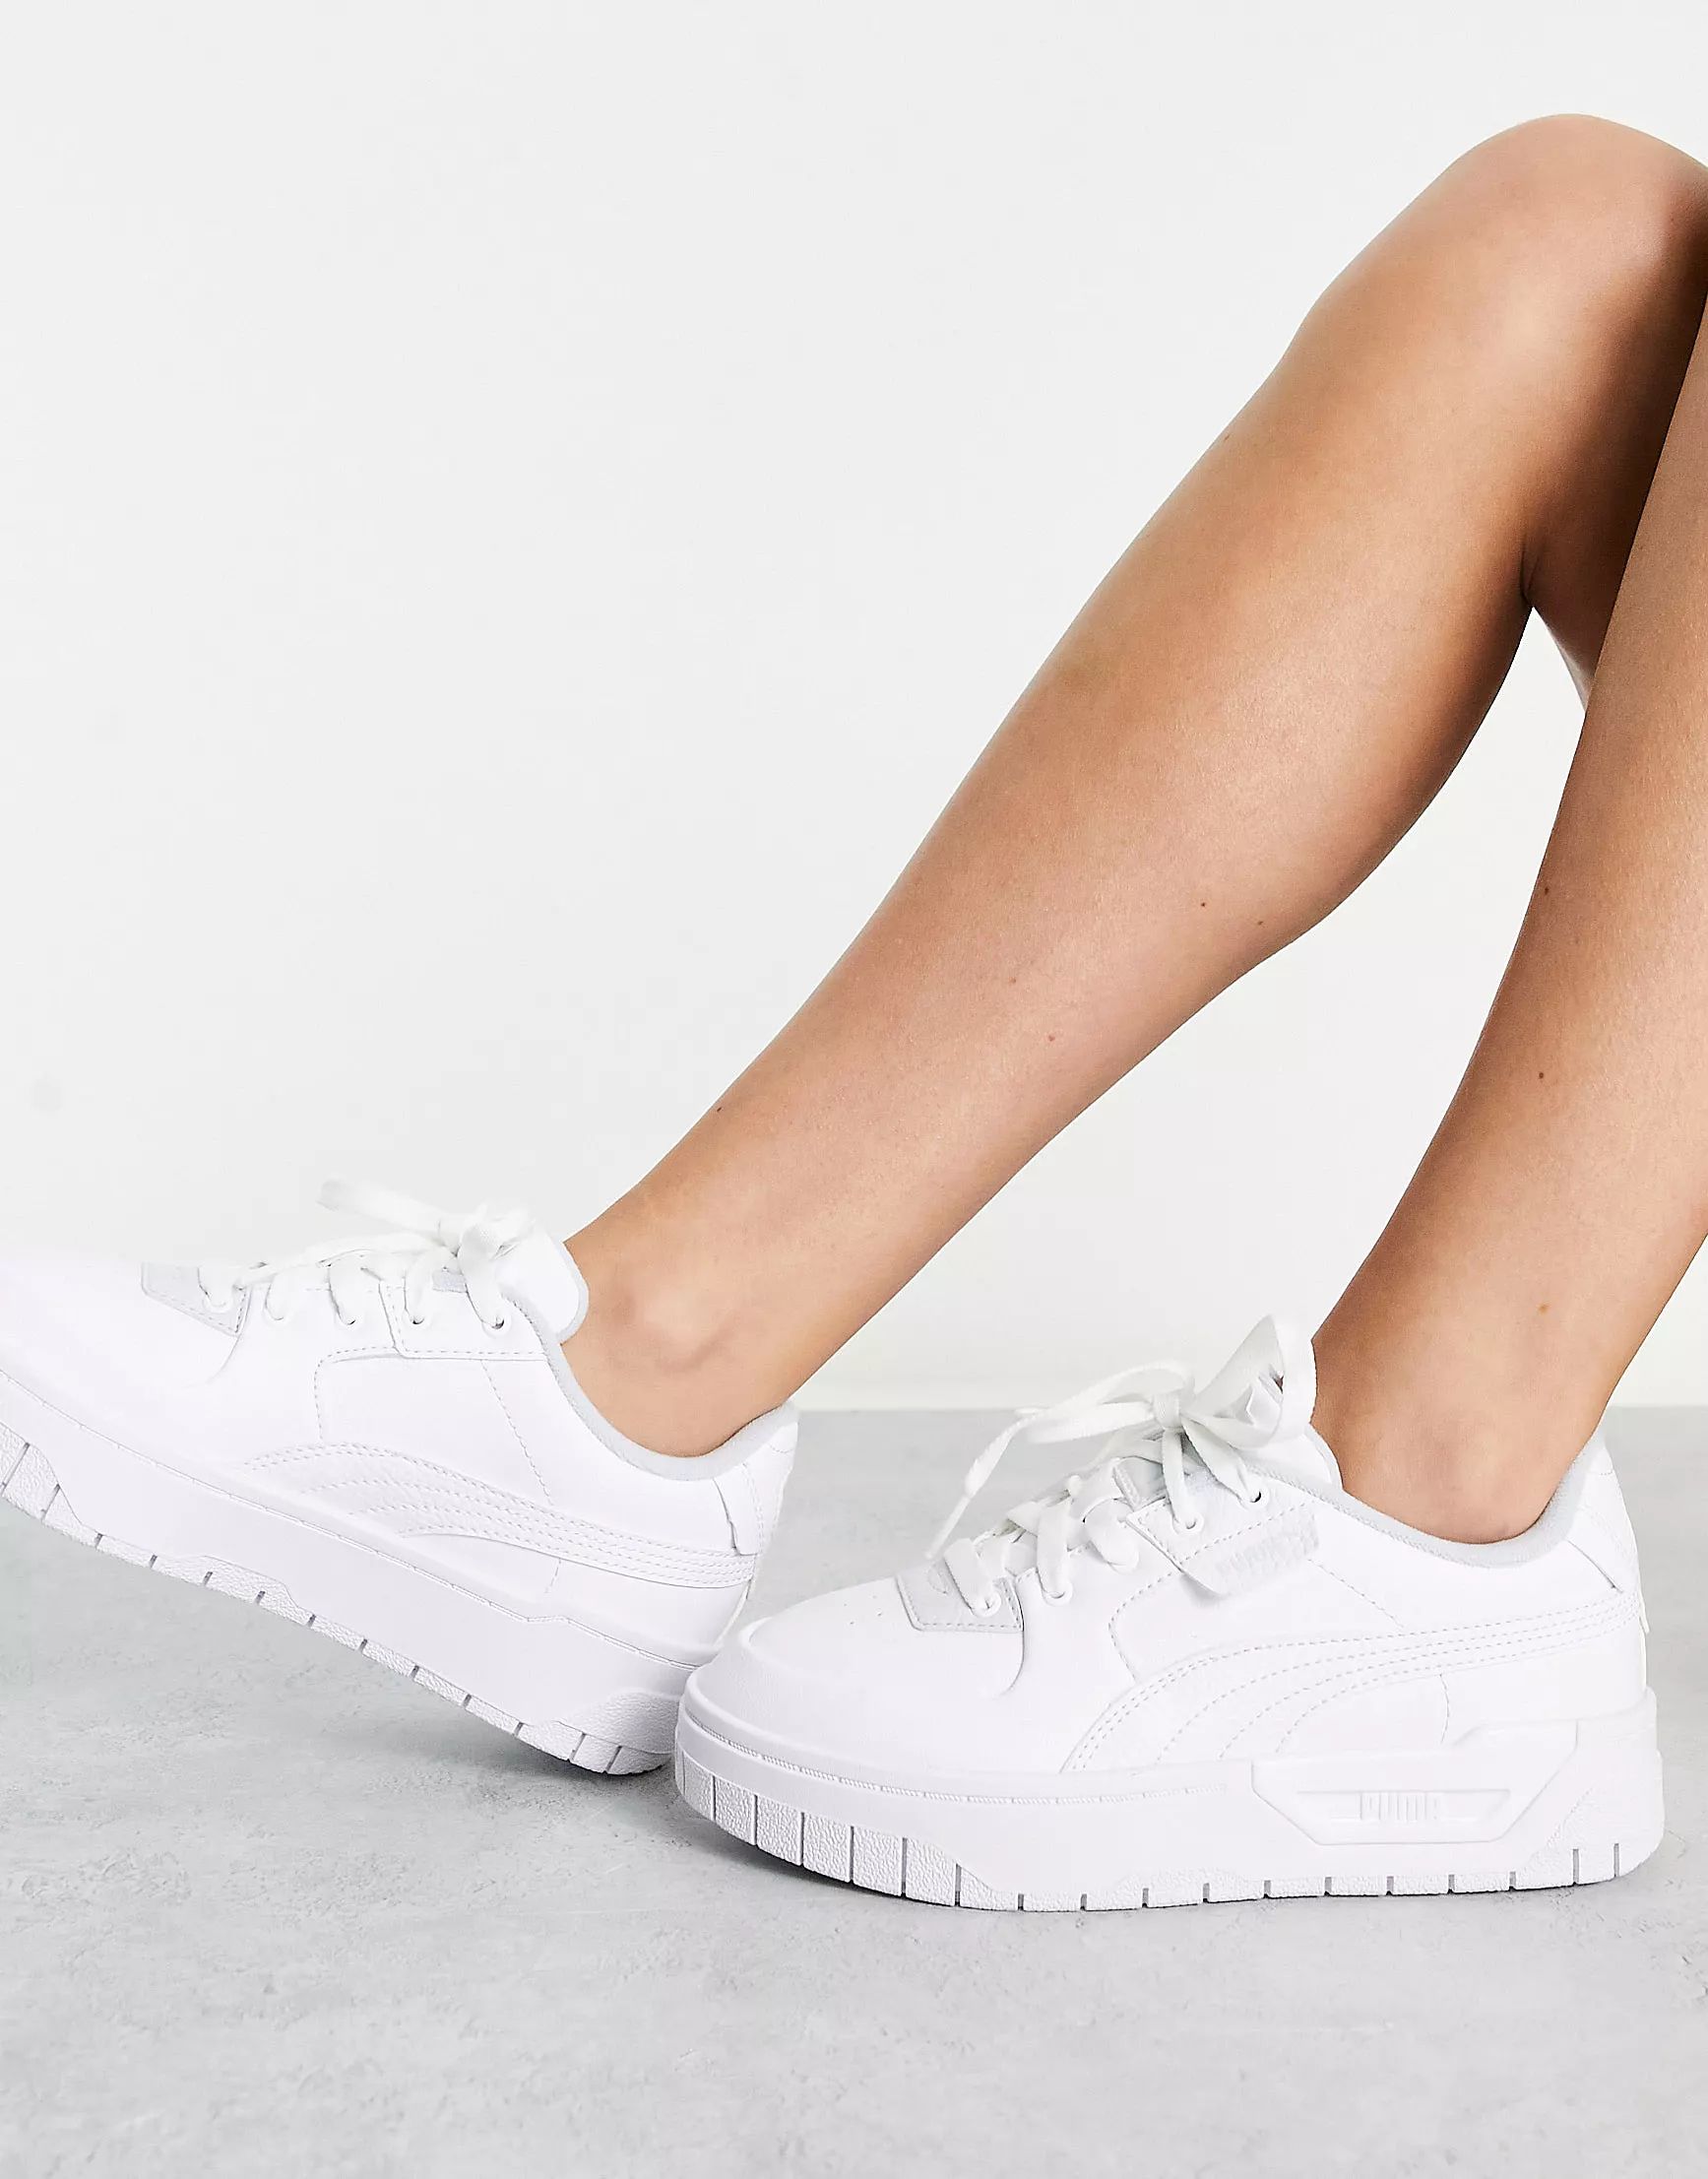 PUMA Cali Dream sneakers in white and light blue | ASOS (Global)